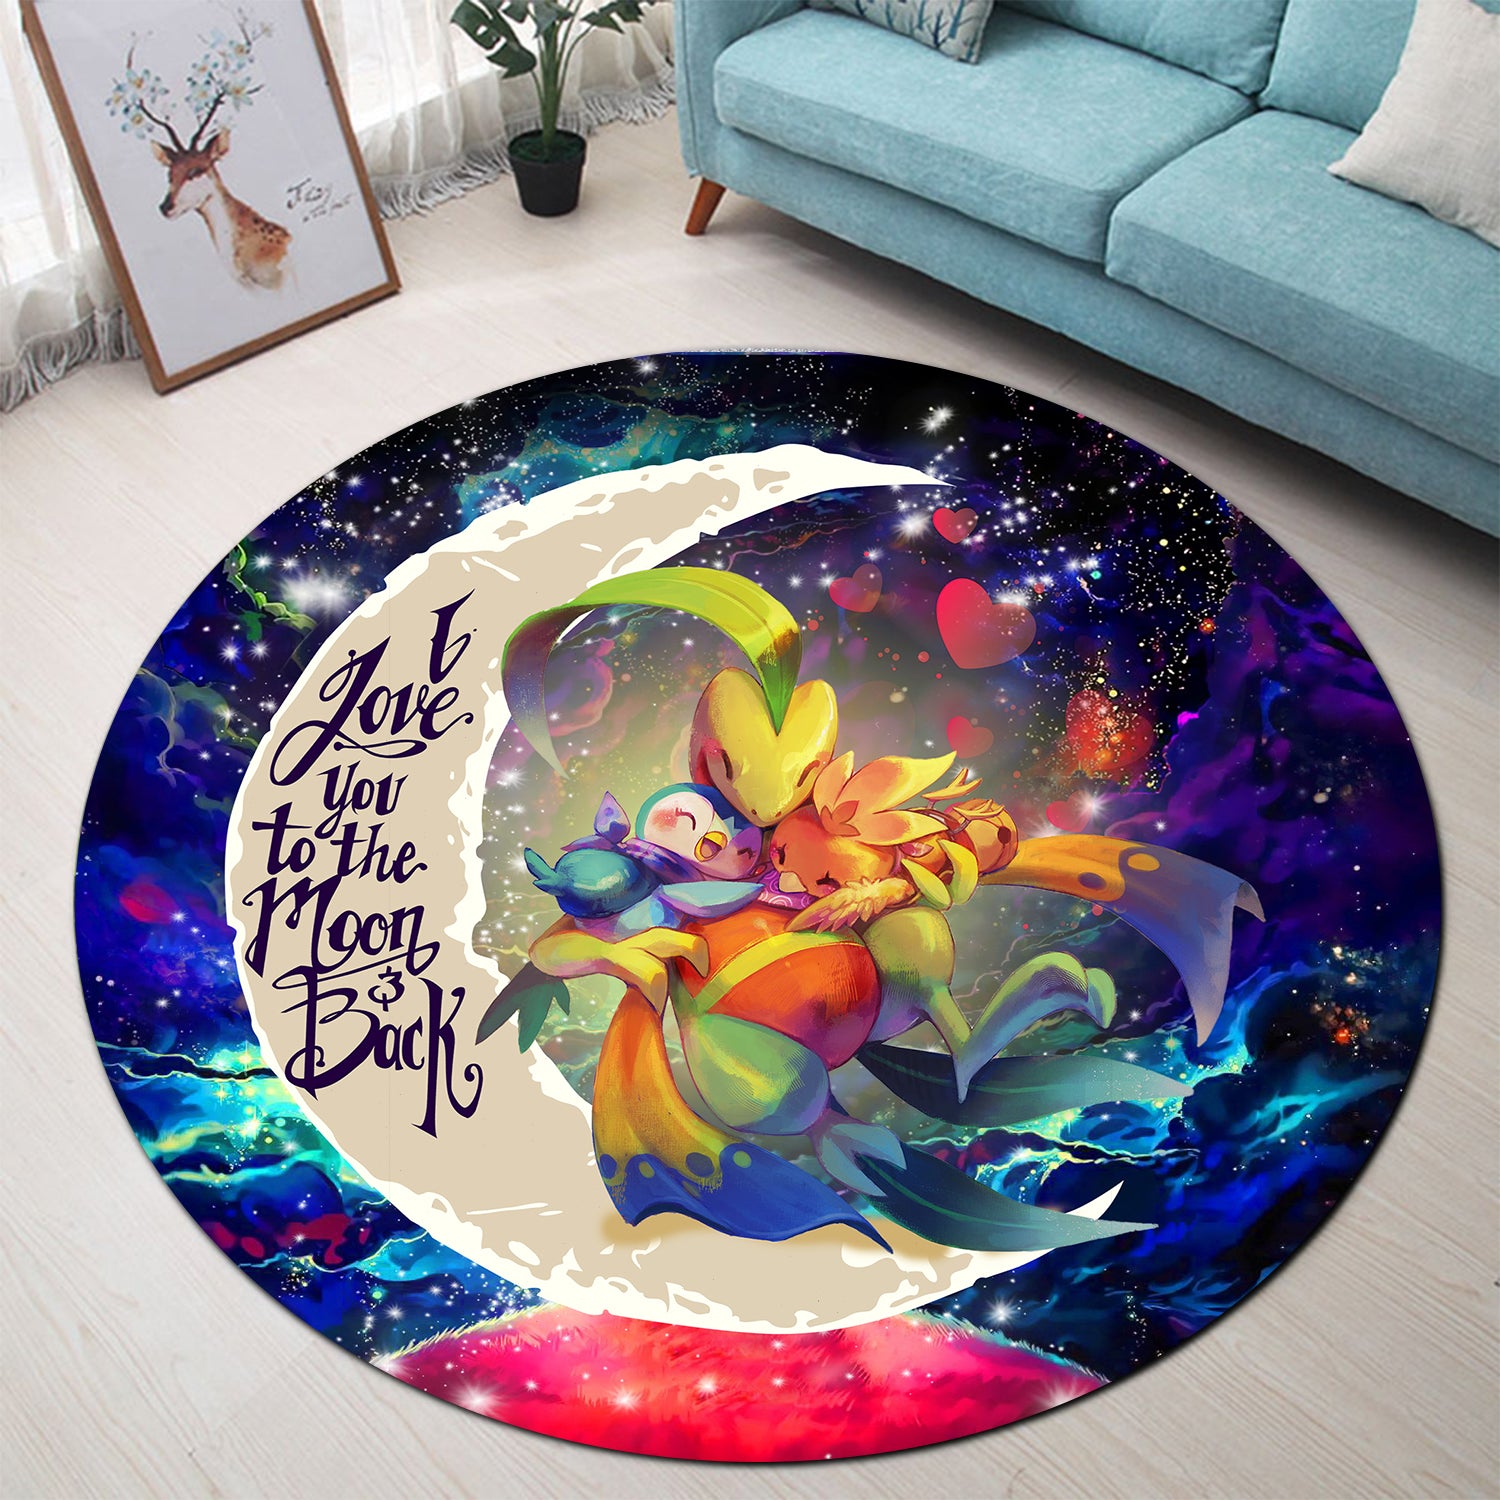 Torchic Grovyle Piplup Pokemon Love You To The Moon Galaxy Round Carpet Rug Bedroom Livingroom Home Decor Nearkii